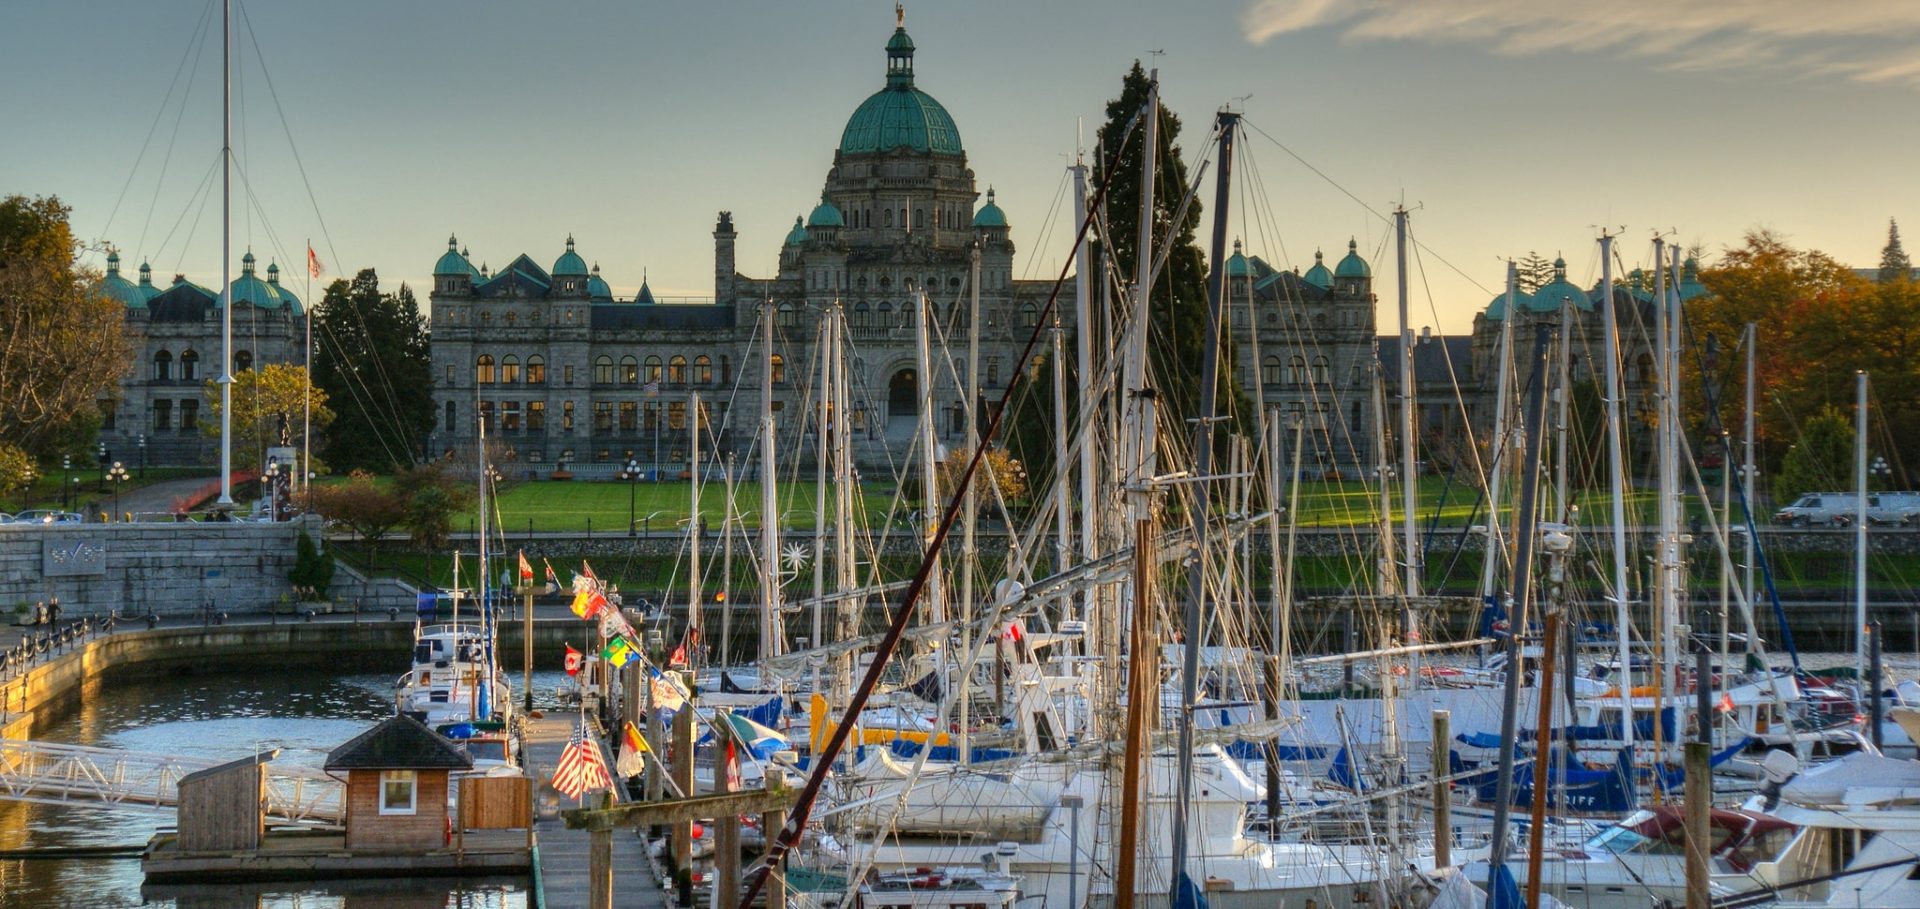 The docks at the Provincial legislature have many docked sail boats. Many boats have a different national flag.